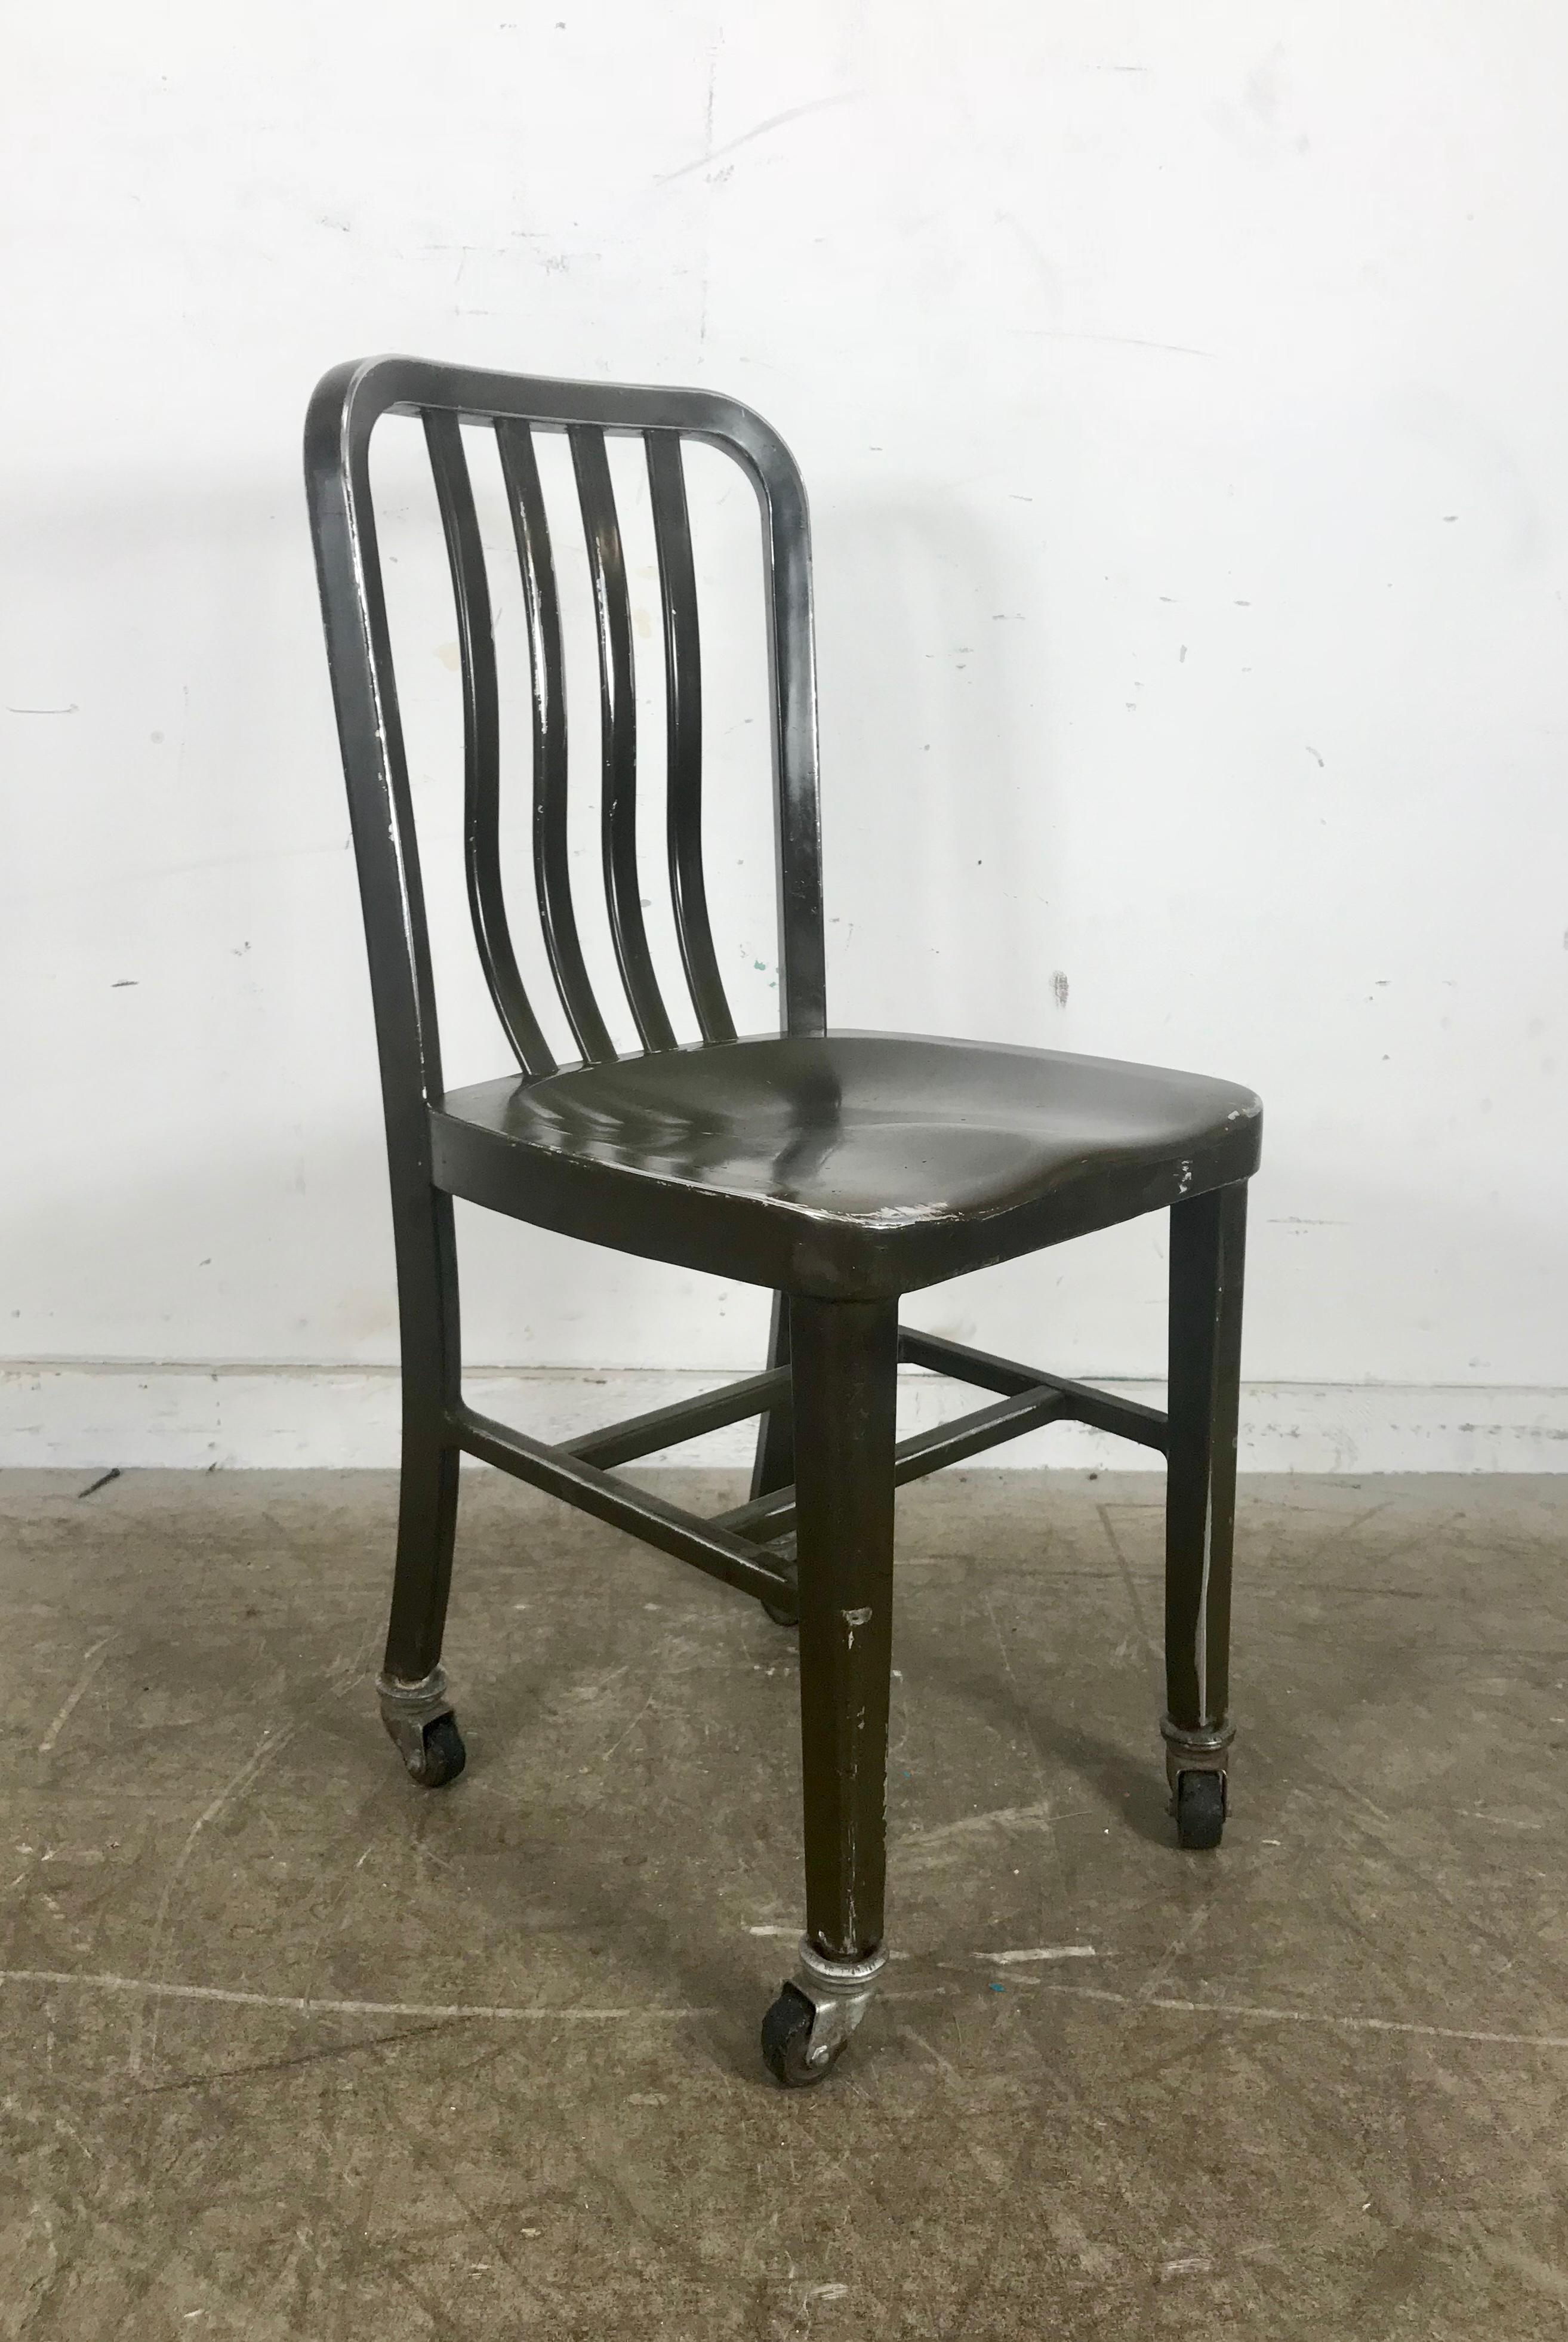 Antique industrial aluminum rolling desk chair by General Fireproofing co. Amazing patina, surface and finish, curved aluminum slat back for optimum comfort, retains original painted greenish brown finish as well as aluminum and rubber wheels,.